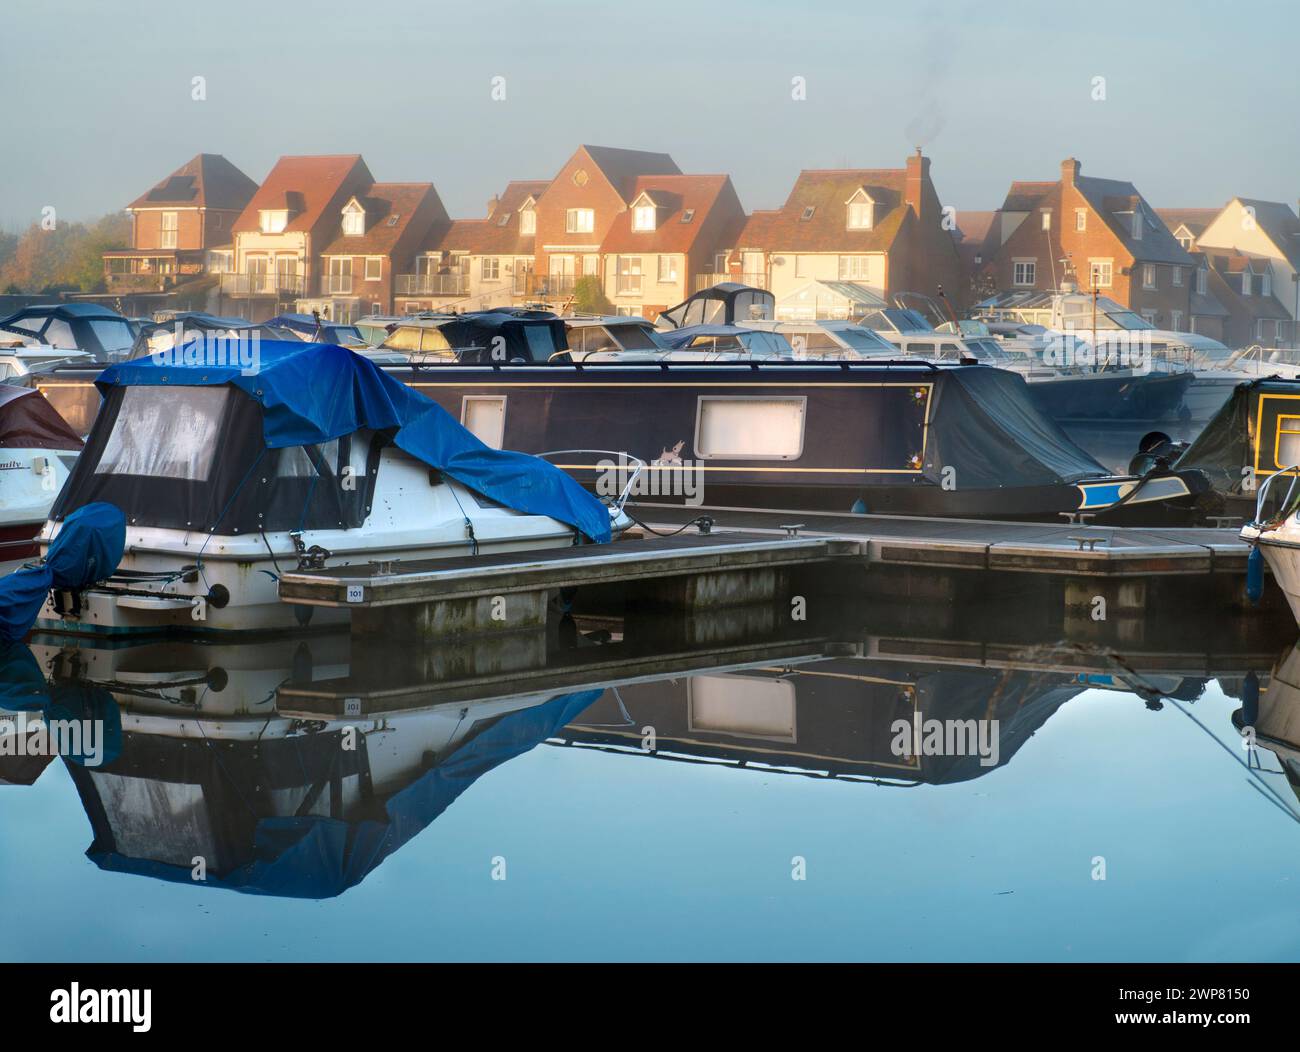 Abingdon-on-Thames claims to be the oldest town in England. And the River Thames runs through the heart of it. Here we see its up-market marina by the Stock Photo